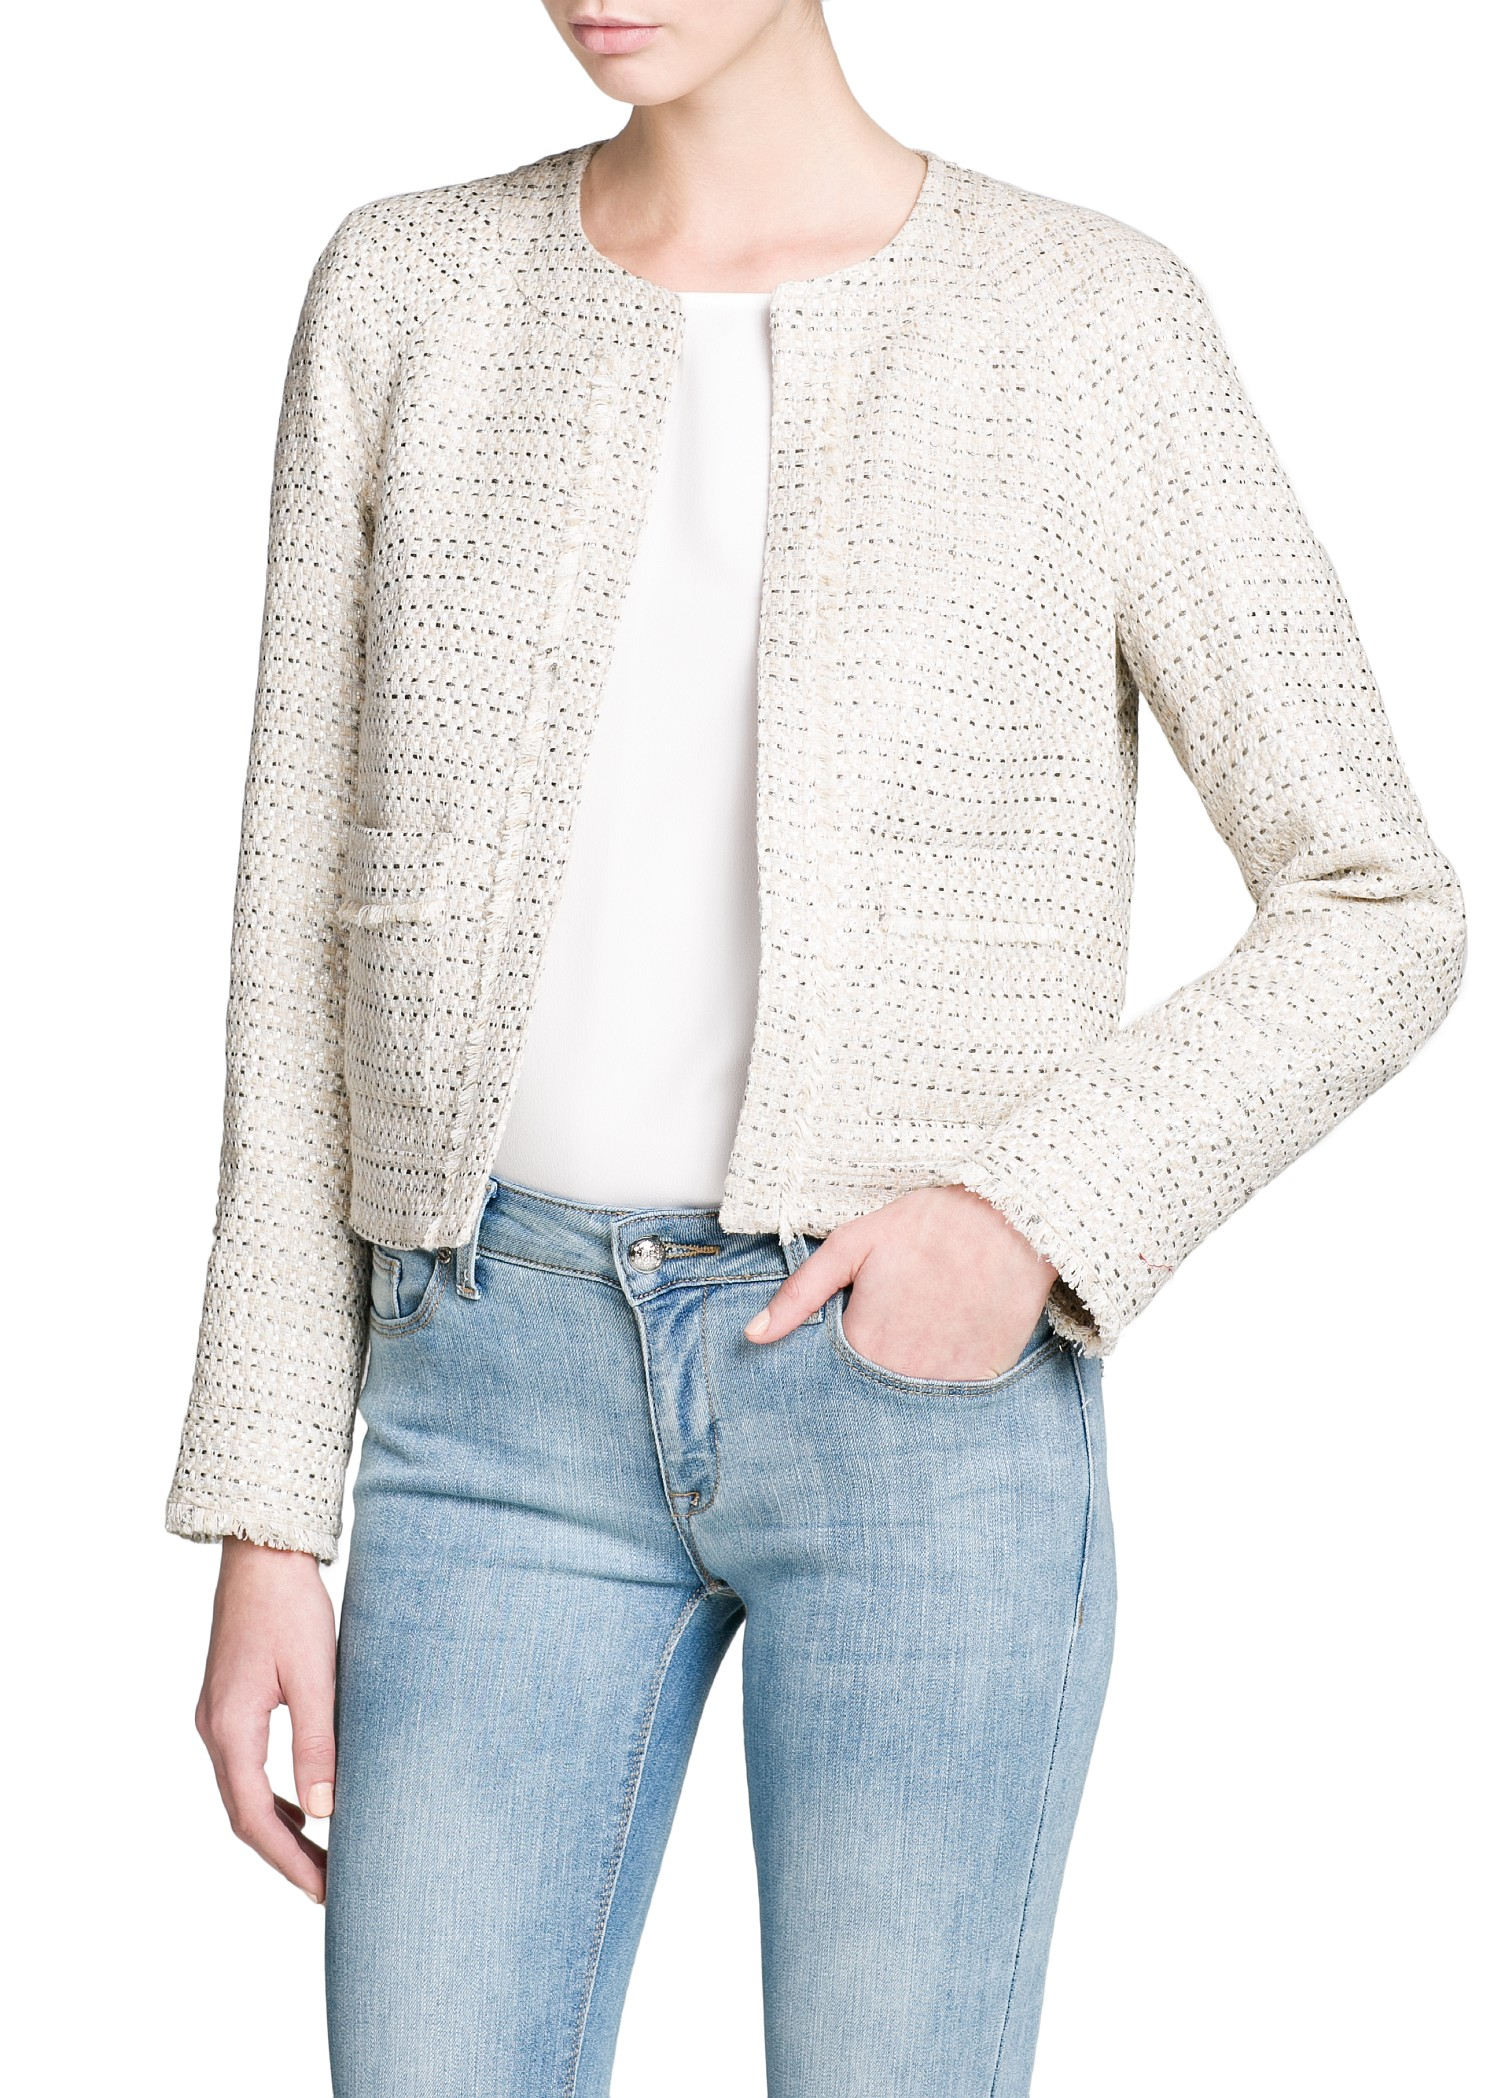 Lyst - Mango Frayed Detail Bouclé Jacket in Natural